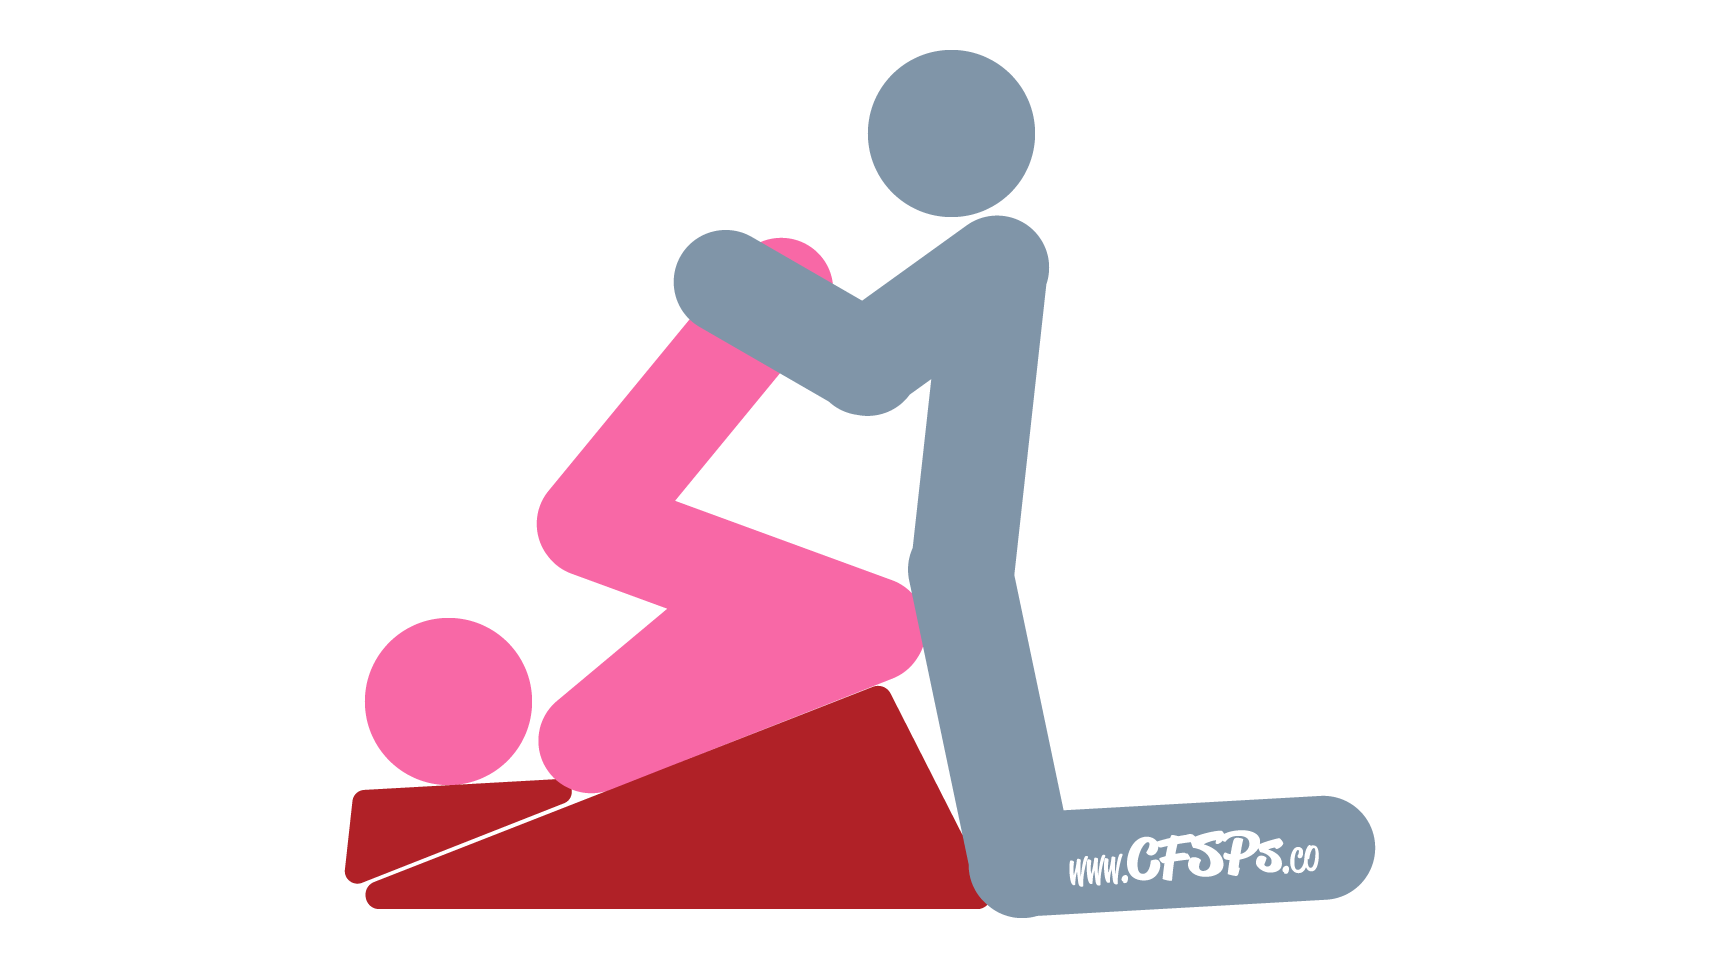 This stick figure image depicts a man and woman having sex in the Plow 2 sex position. The woman is lying on a Liberator Ramp sex pillow with her butt at the edge of the high side, her knees almost at her chest, and a Liberator Wedge sex pillow under her head. The man is kneeling before her and holding onto her ankles.